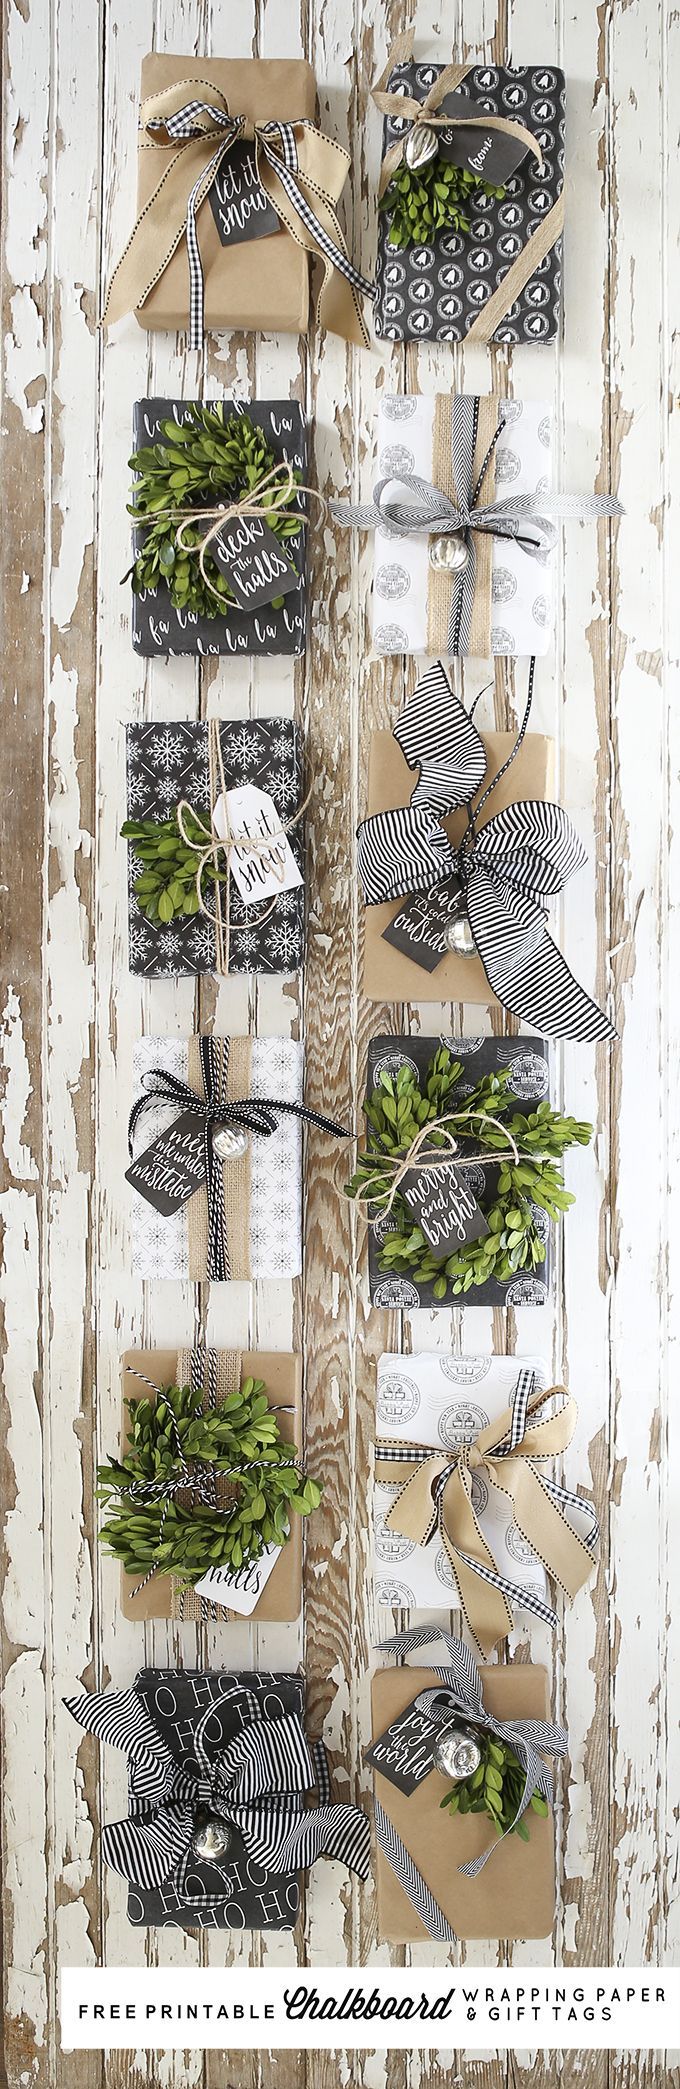 Free Printable Chalkboard Wrapping Paper and Gift Tags by Ella Claire.